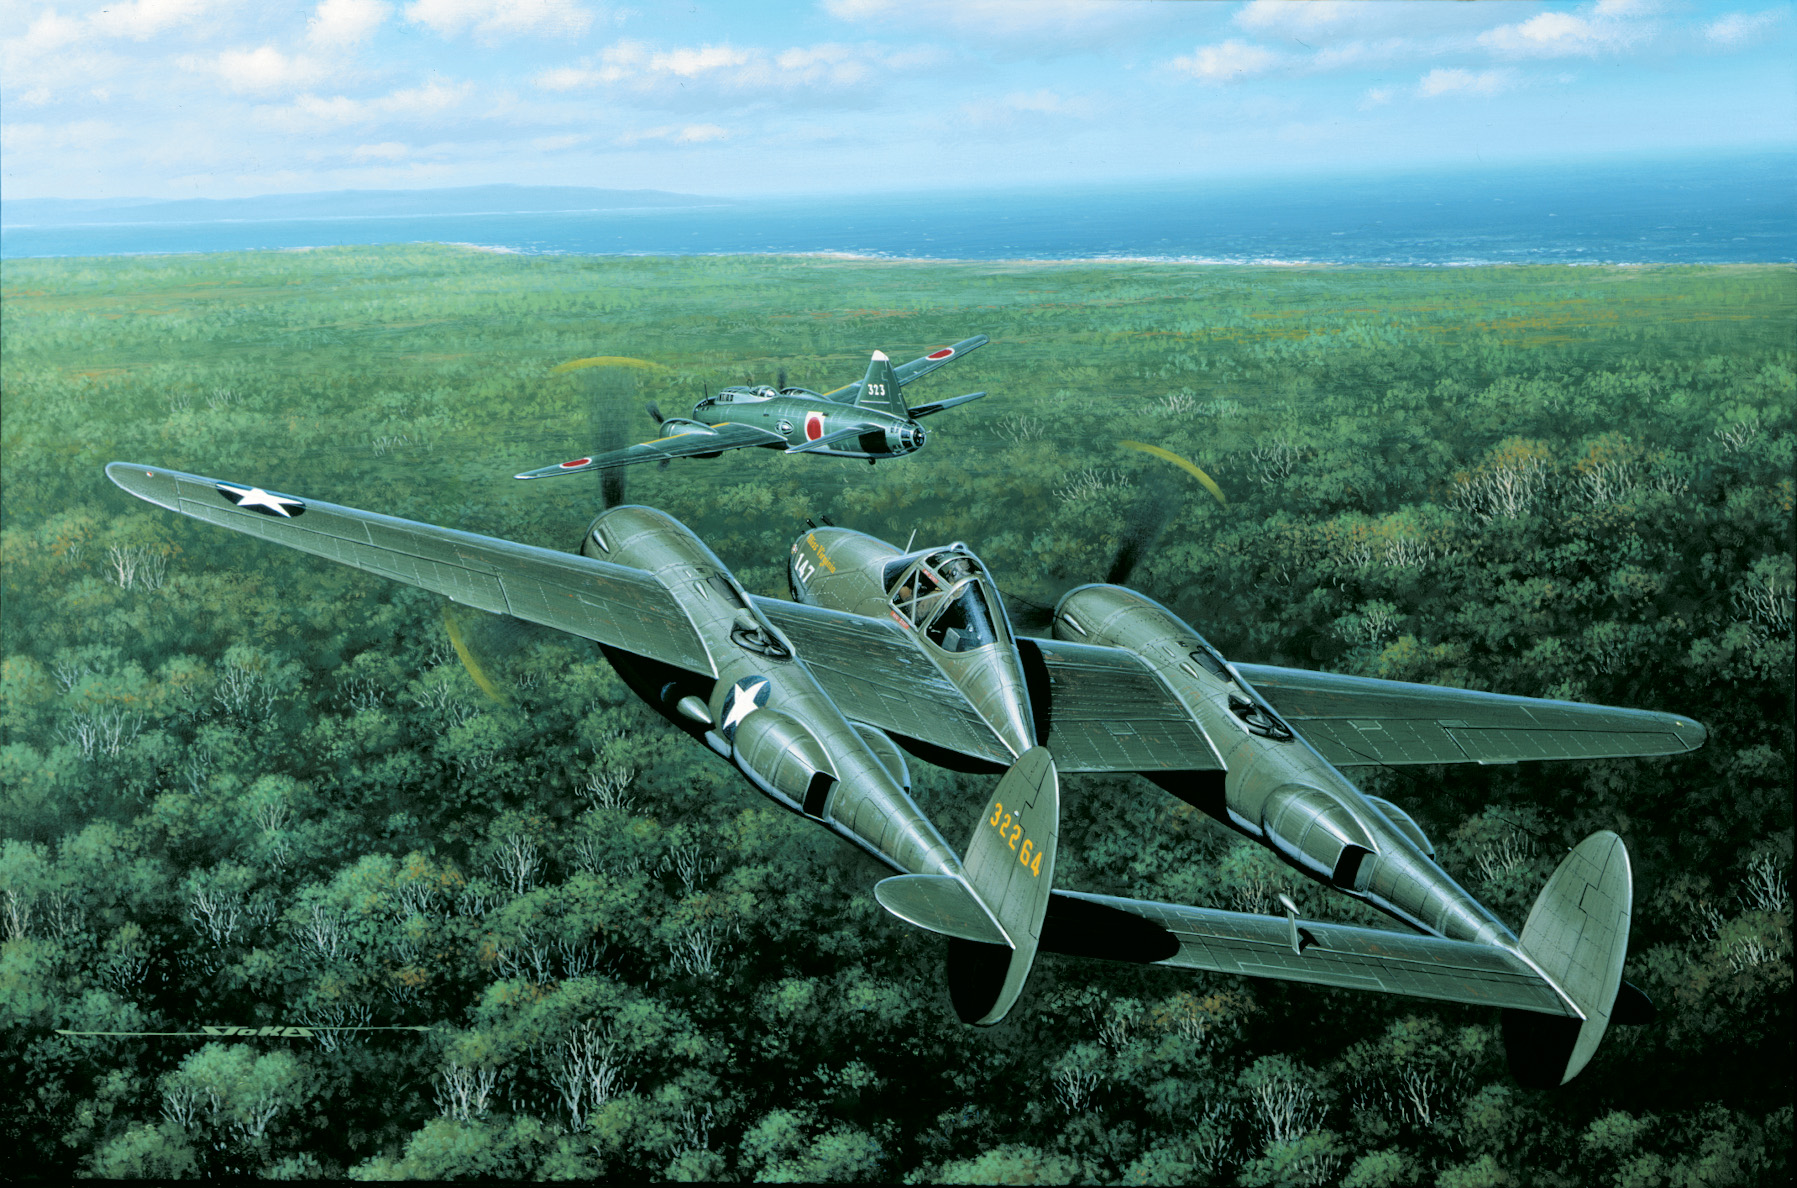 Layton intercepted Japanese Admiral Yamamoto’s itinerary. Army P-38s rose to shoot down the admiral’s plane on a inspection tour of Bougainville in 1943.